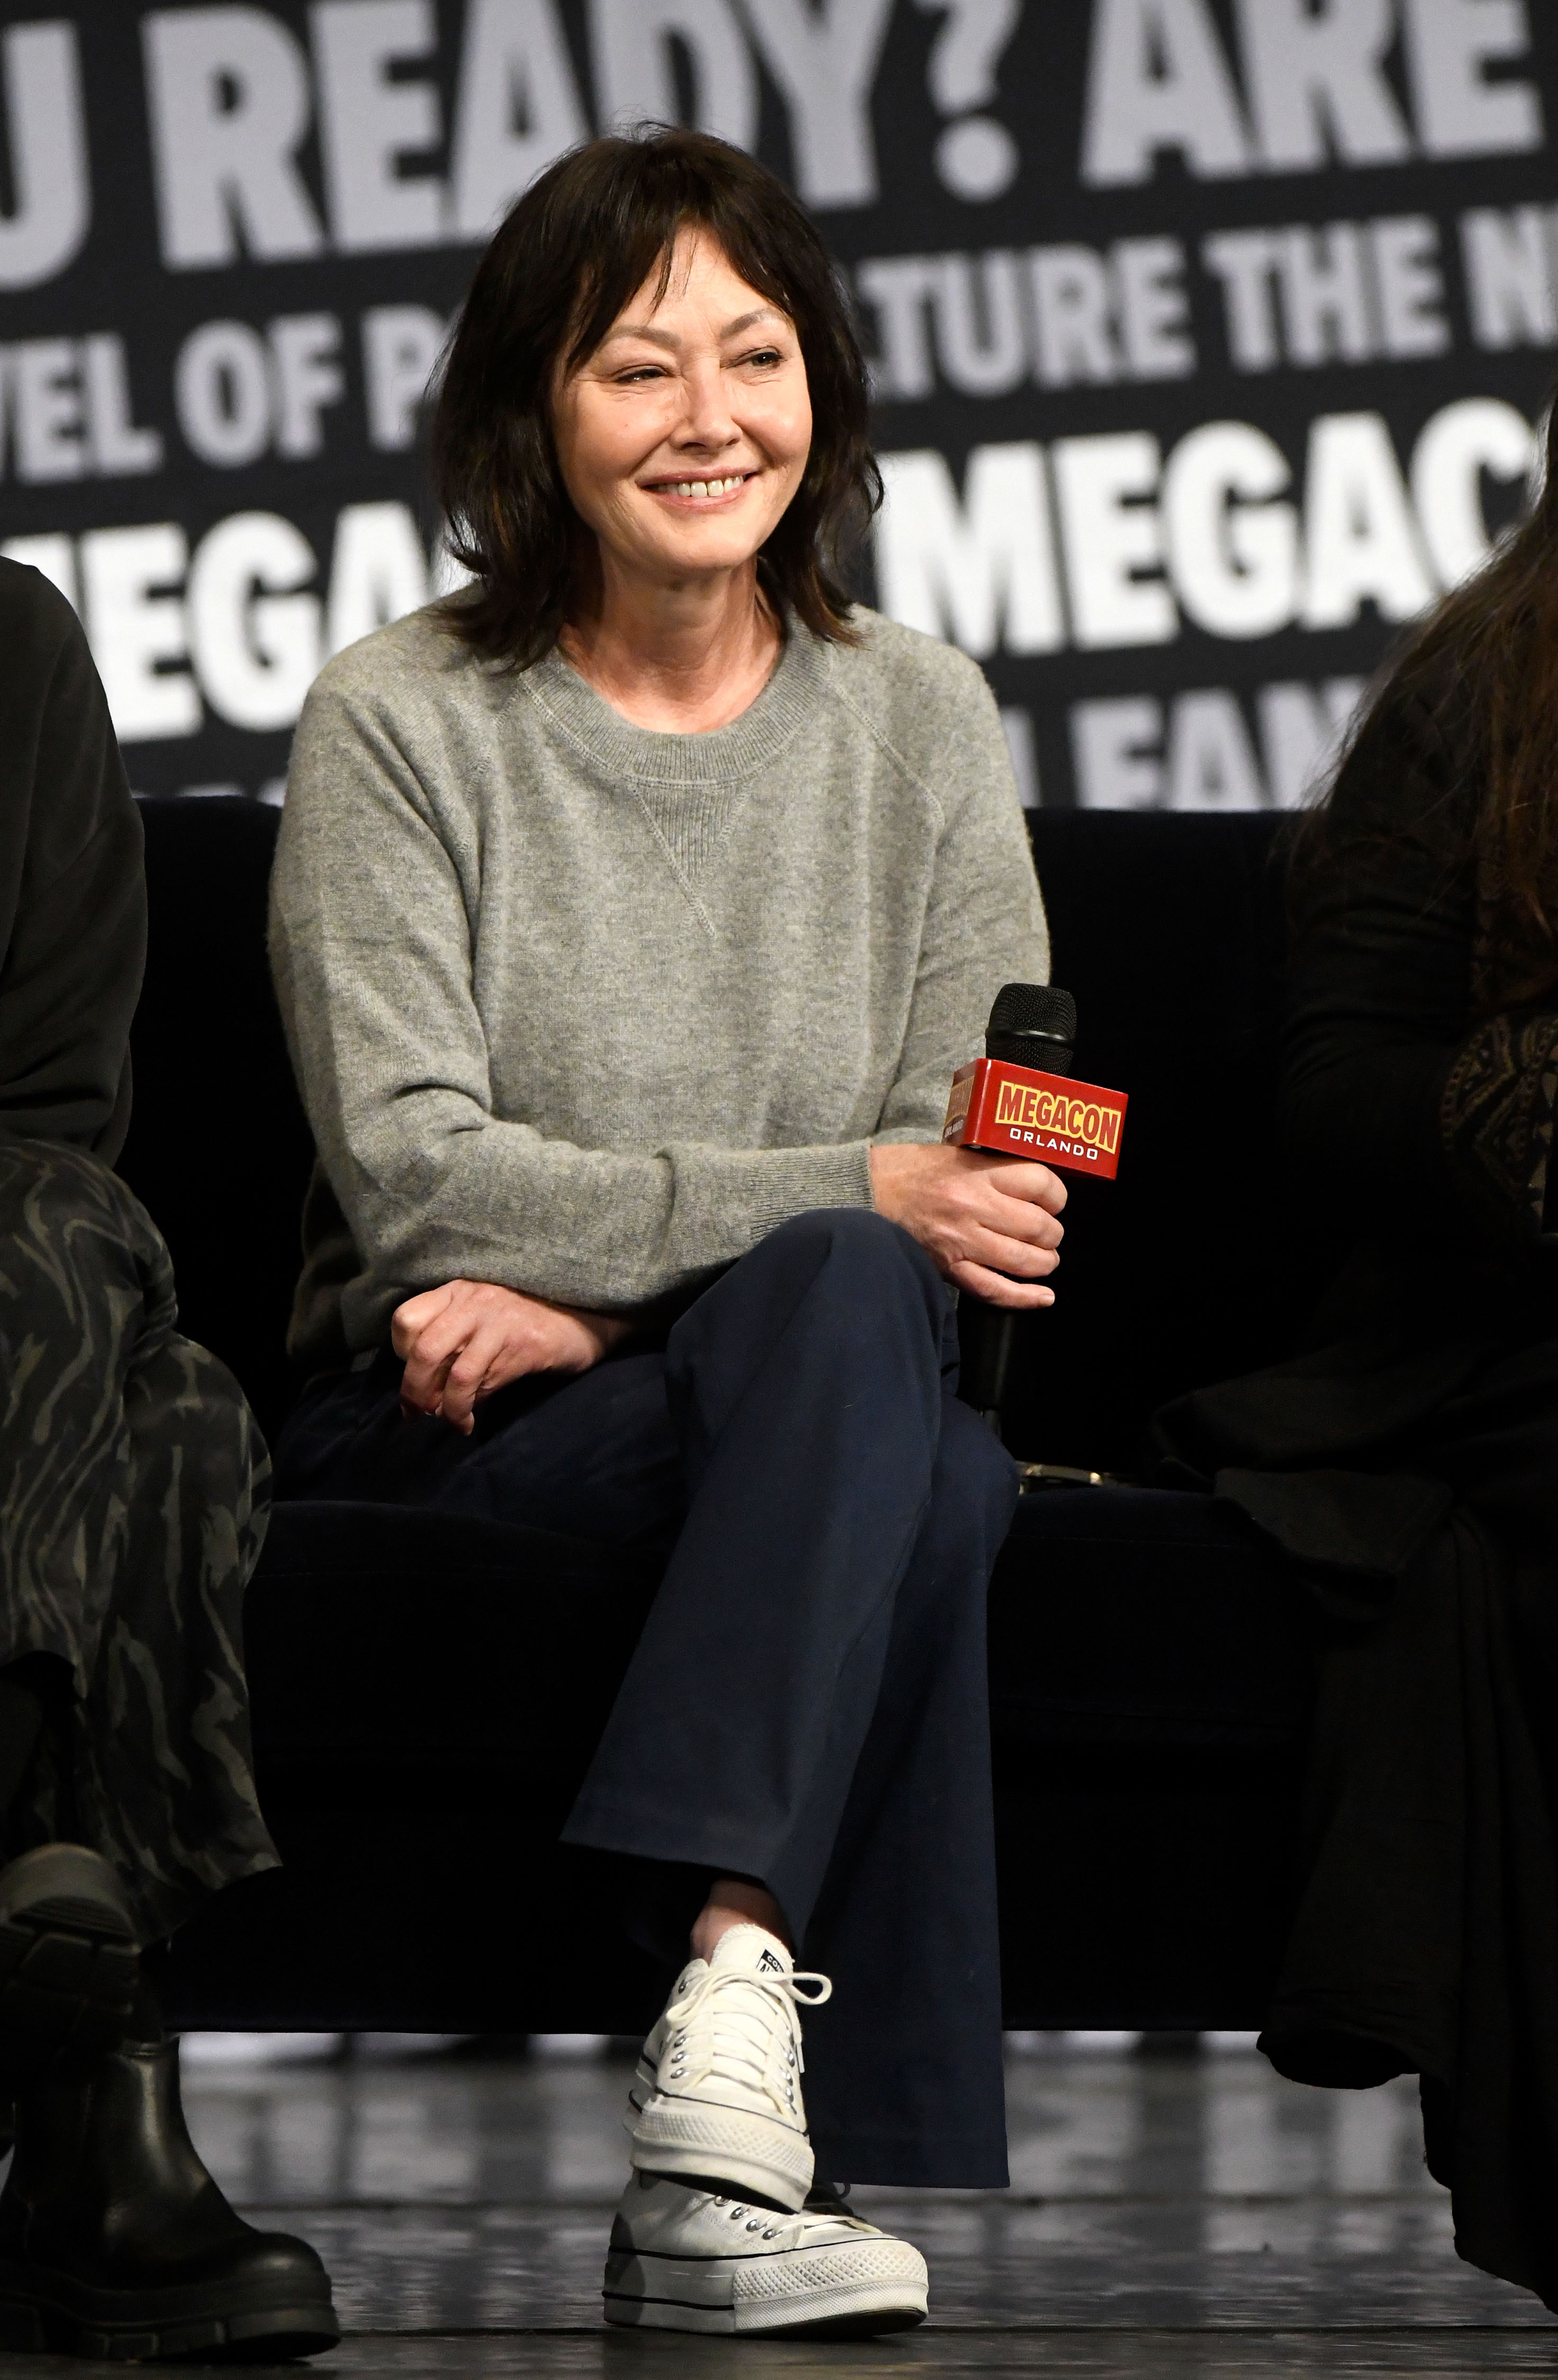 Shannen Doherty during a Q&A session at MegaCon Orlando 2024 on February 4, in Orlando, Florida. | Source: Getty Images